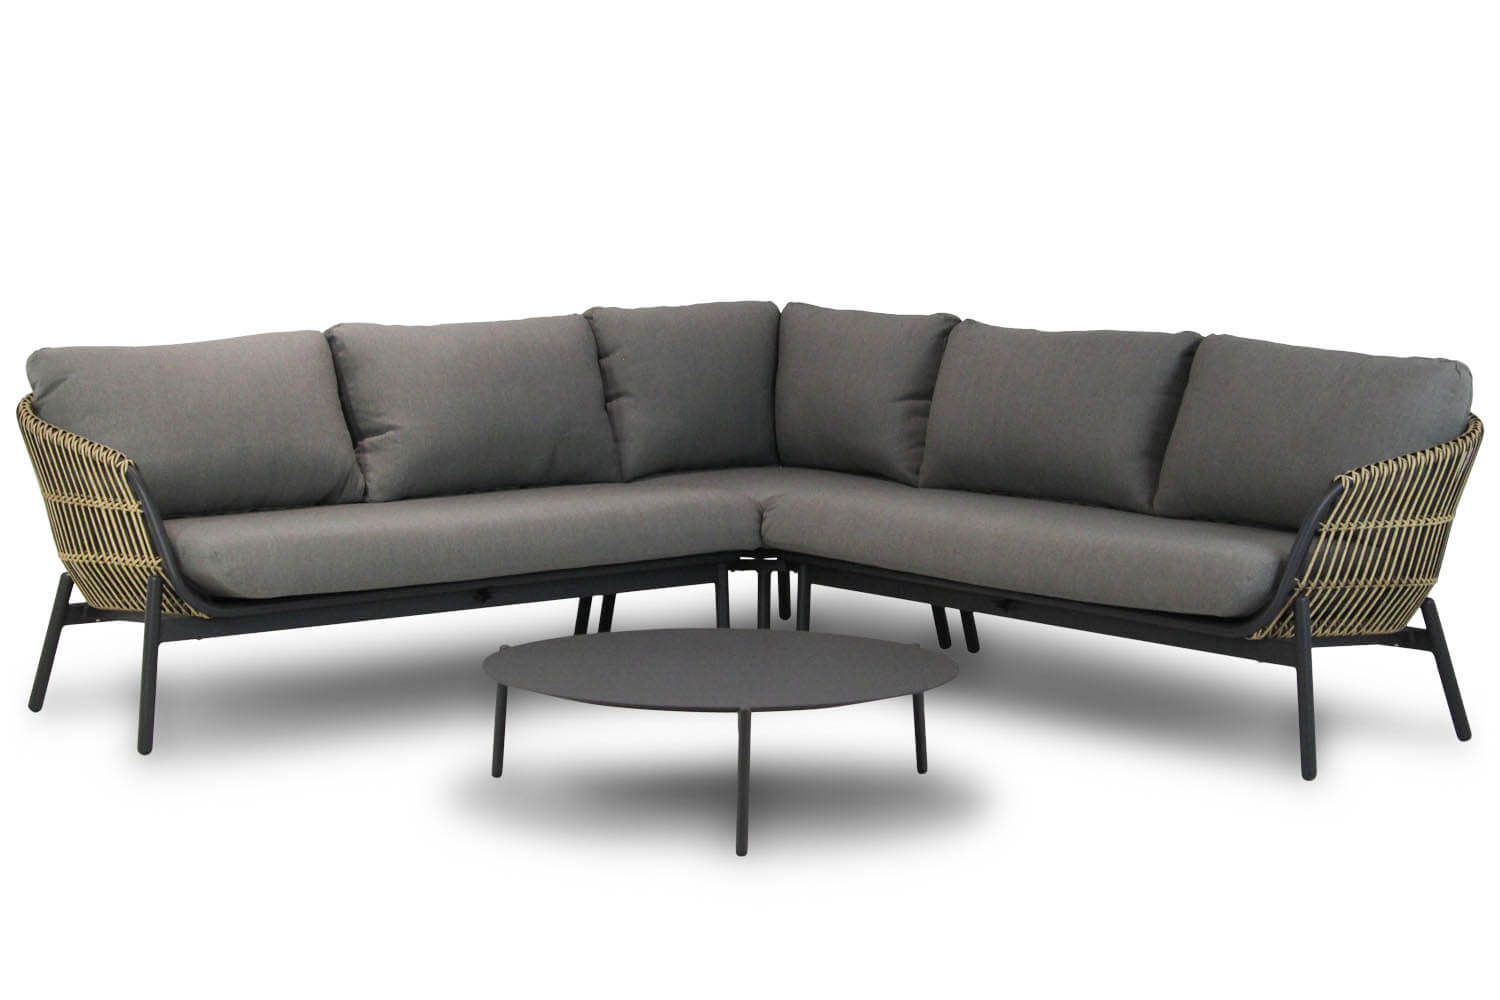 coco nathan loungeset pacific 100 cm - Coco Nathan/Pacific 100 cm hoek loungeset 4-delig